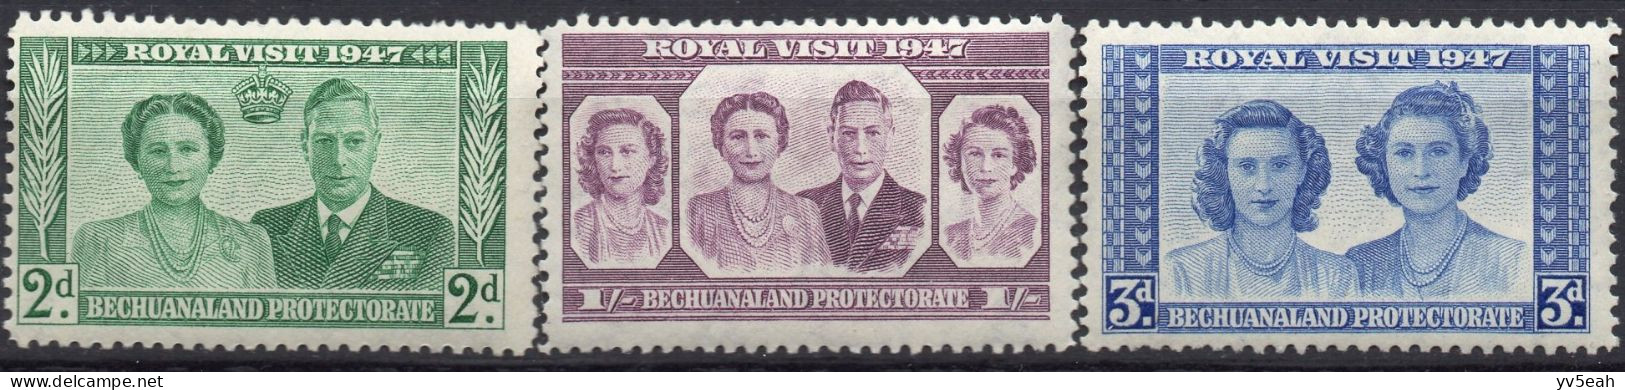 BECHUANALAND PROTECTORATE/1947/MNH/SC#144-6/KING GEORGE VI/ KGVI /ROYAL FAMILY VISIT ISSUED / PARTIAL SET - 1885-1964 Bechuanaland Protettorato